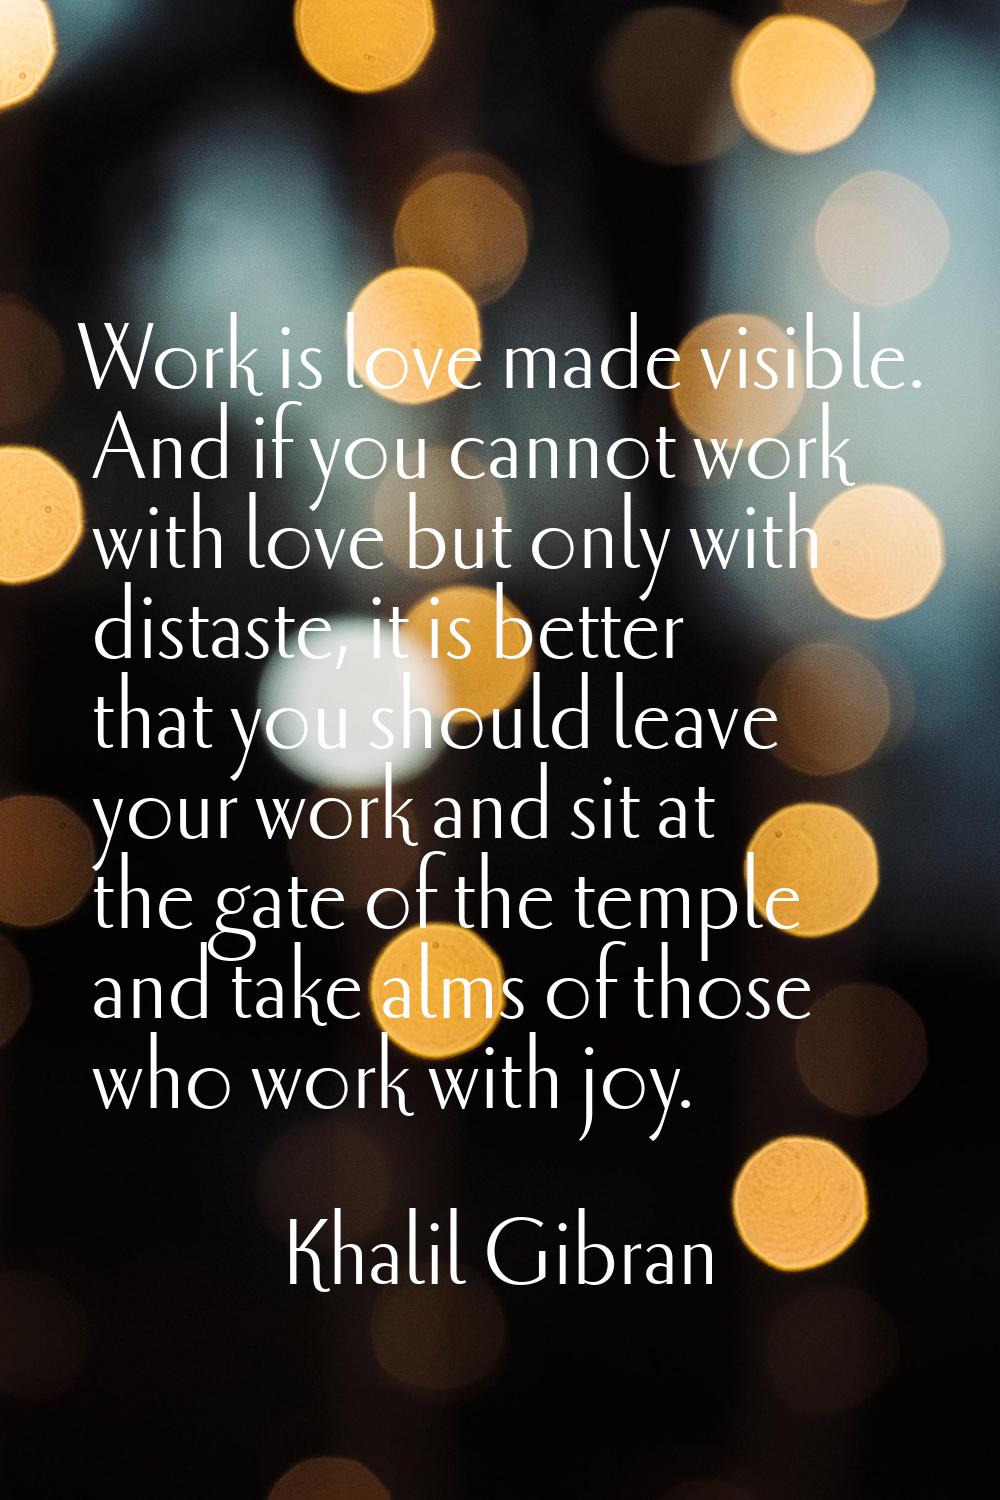 Work is love made visible. And if you cannot work with love but only with distaste, it is better th